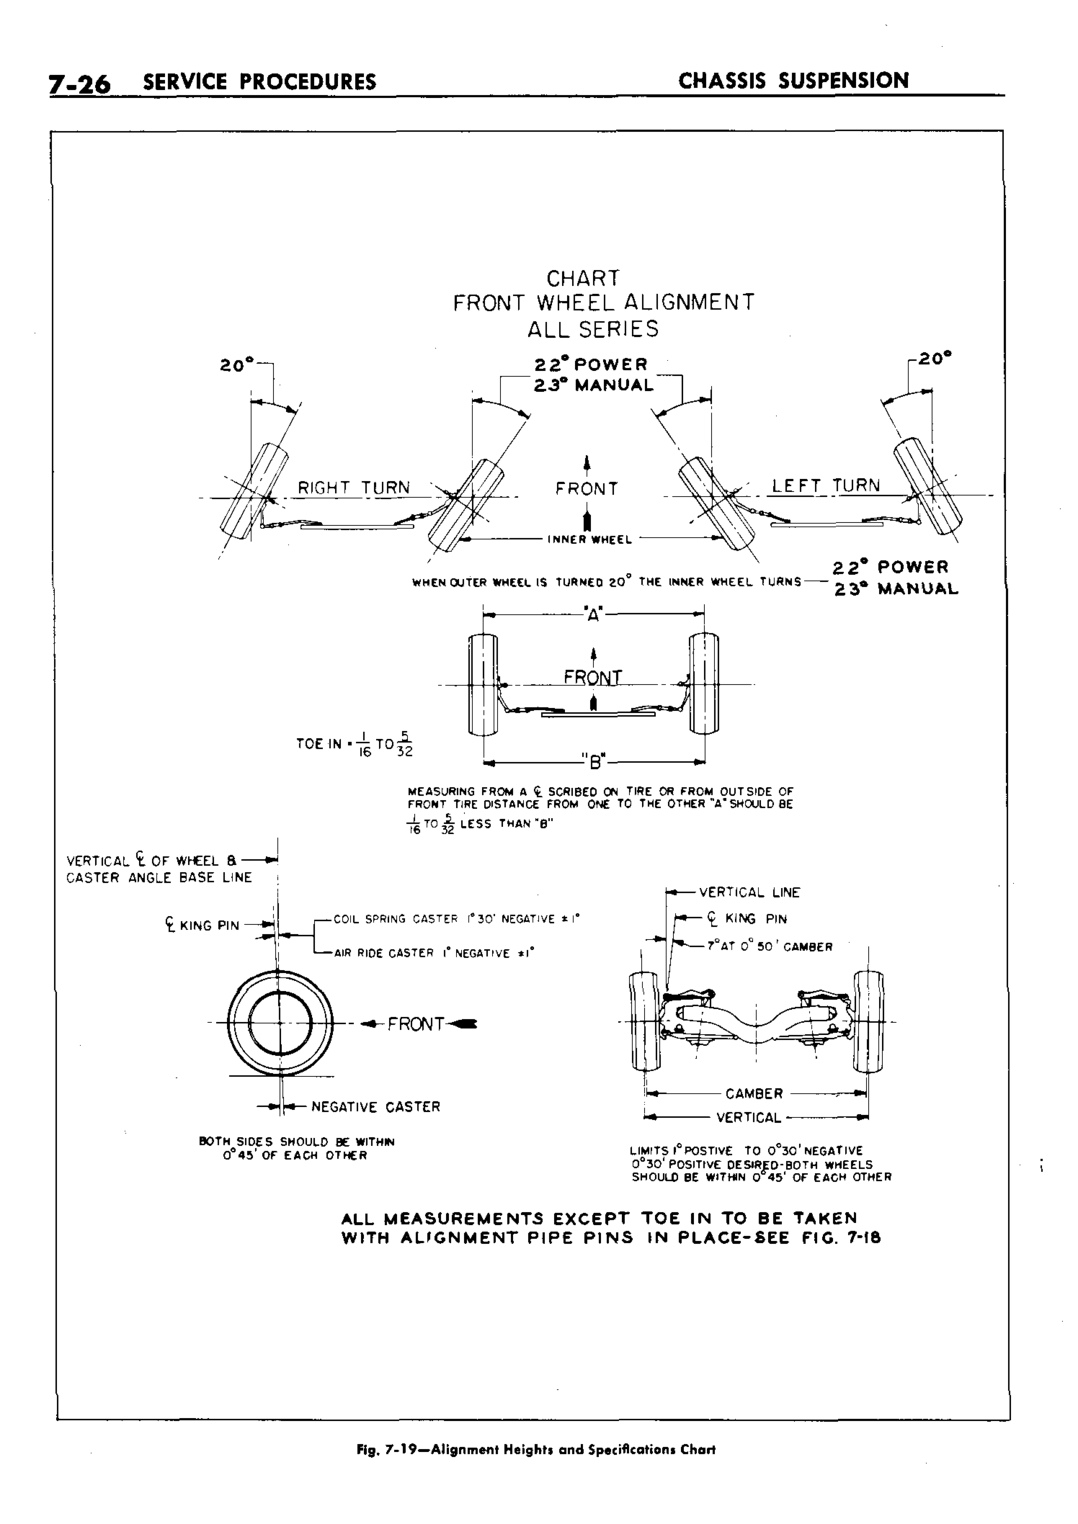 n_08 1959 Buick Shop Manual - Chassis Suspension-026-026.jpg